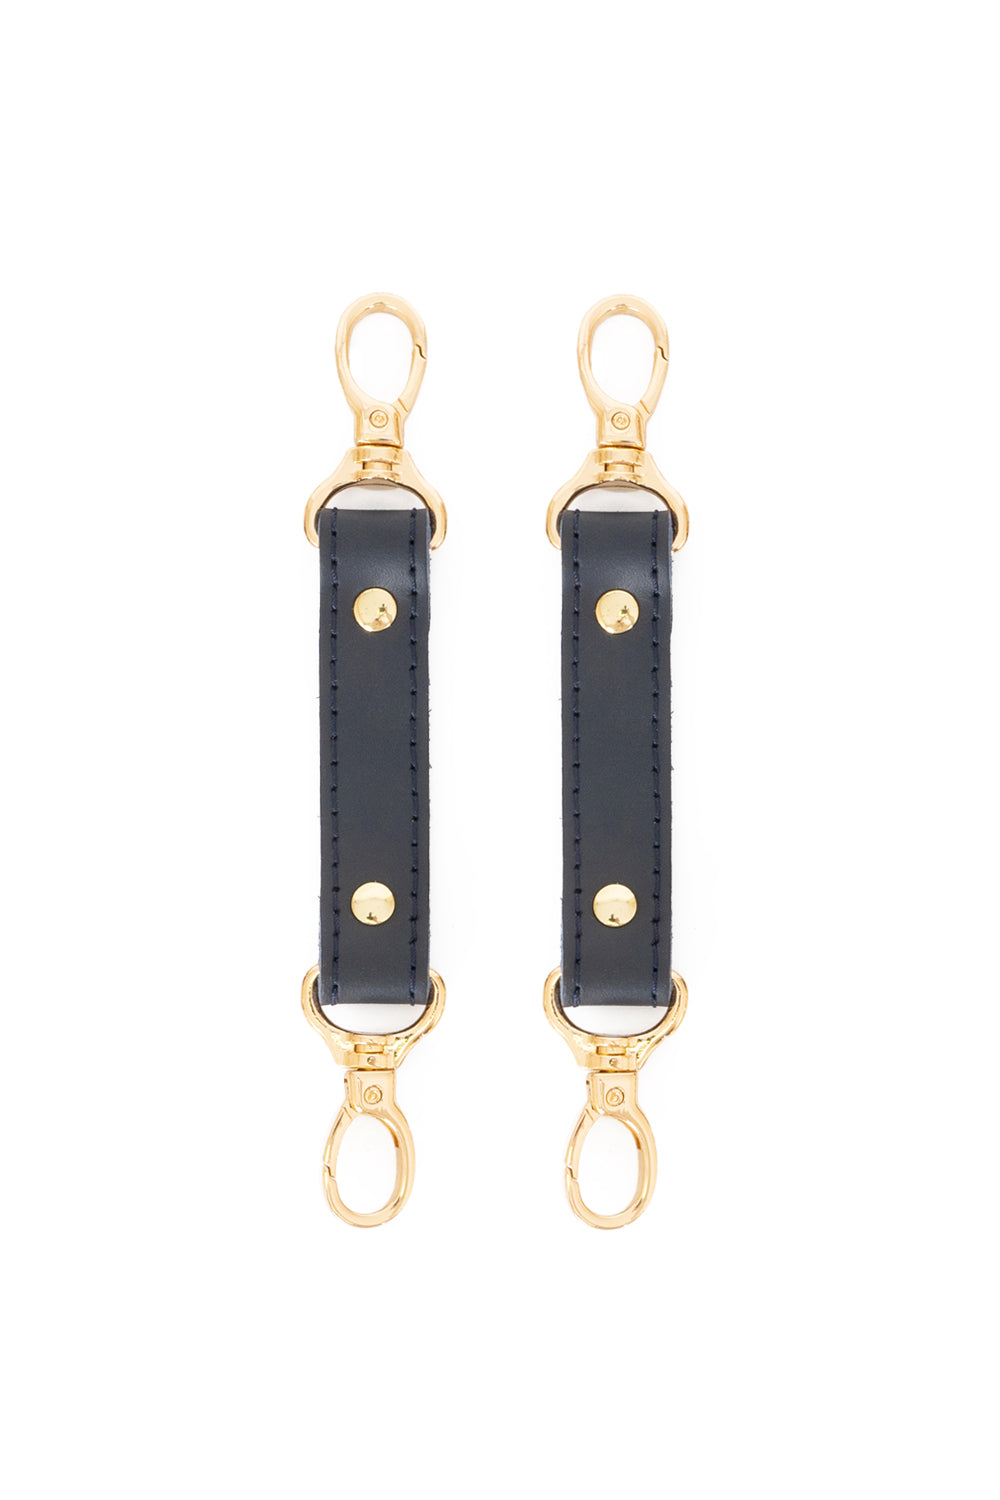 2-Way Leather Connector. Set of 2 Short Straps for Fixation